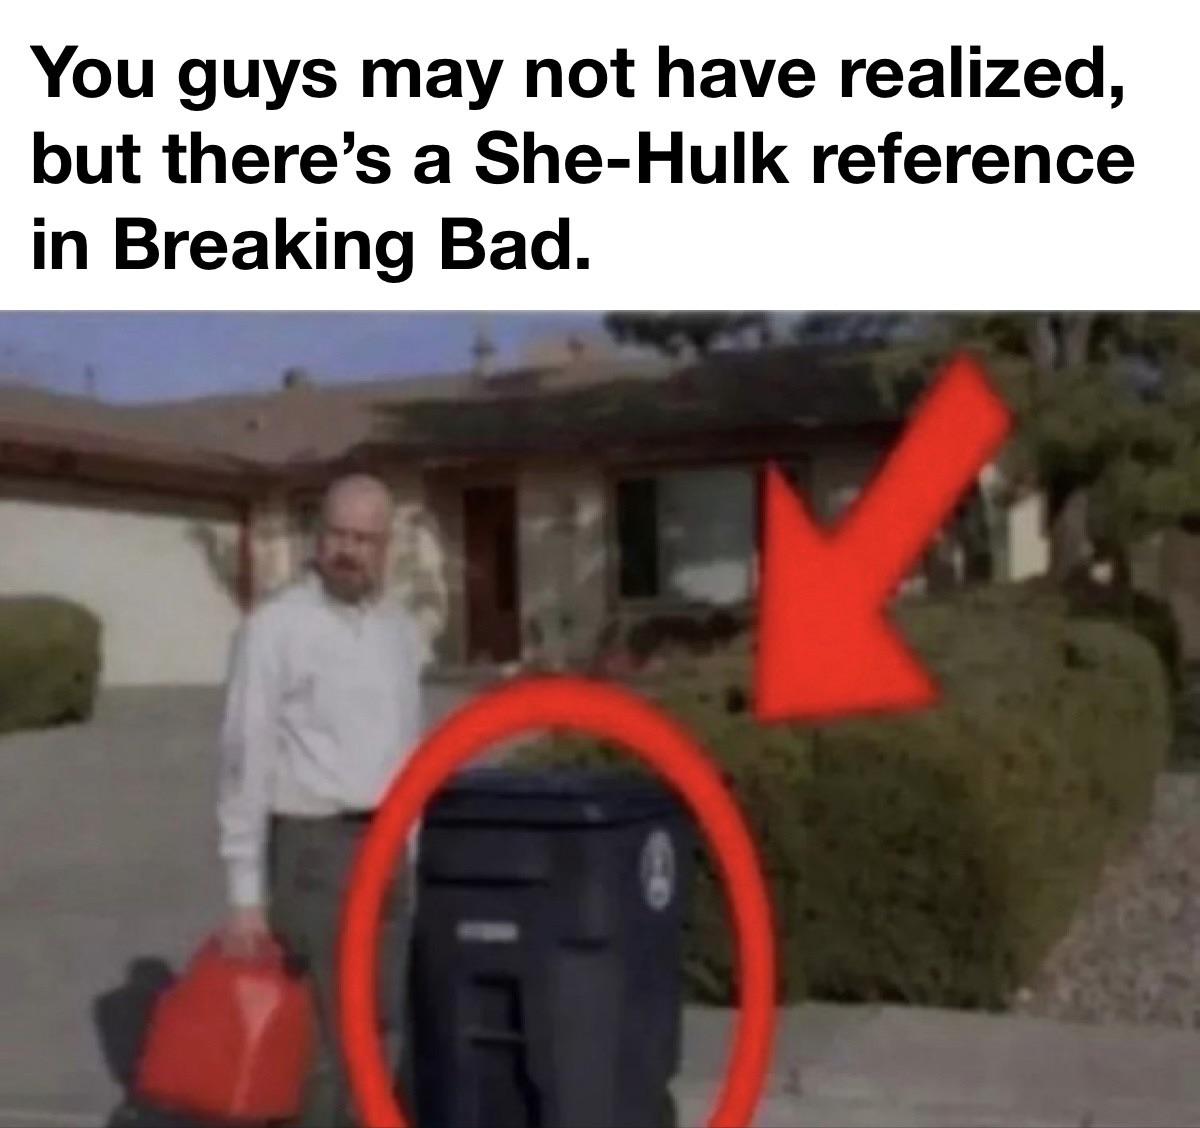 vehicle - You guys may not have realized, but there's a SheHulk reference in Breaking Bad.